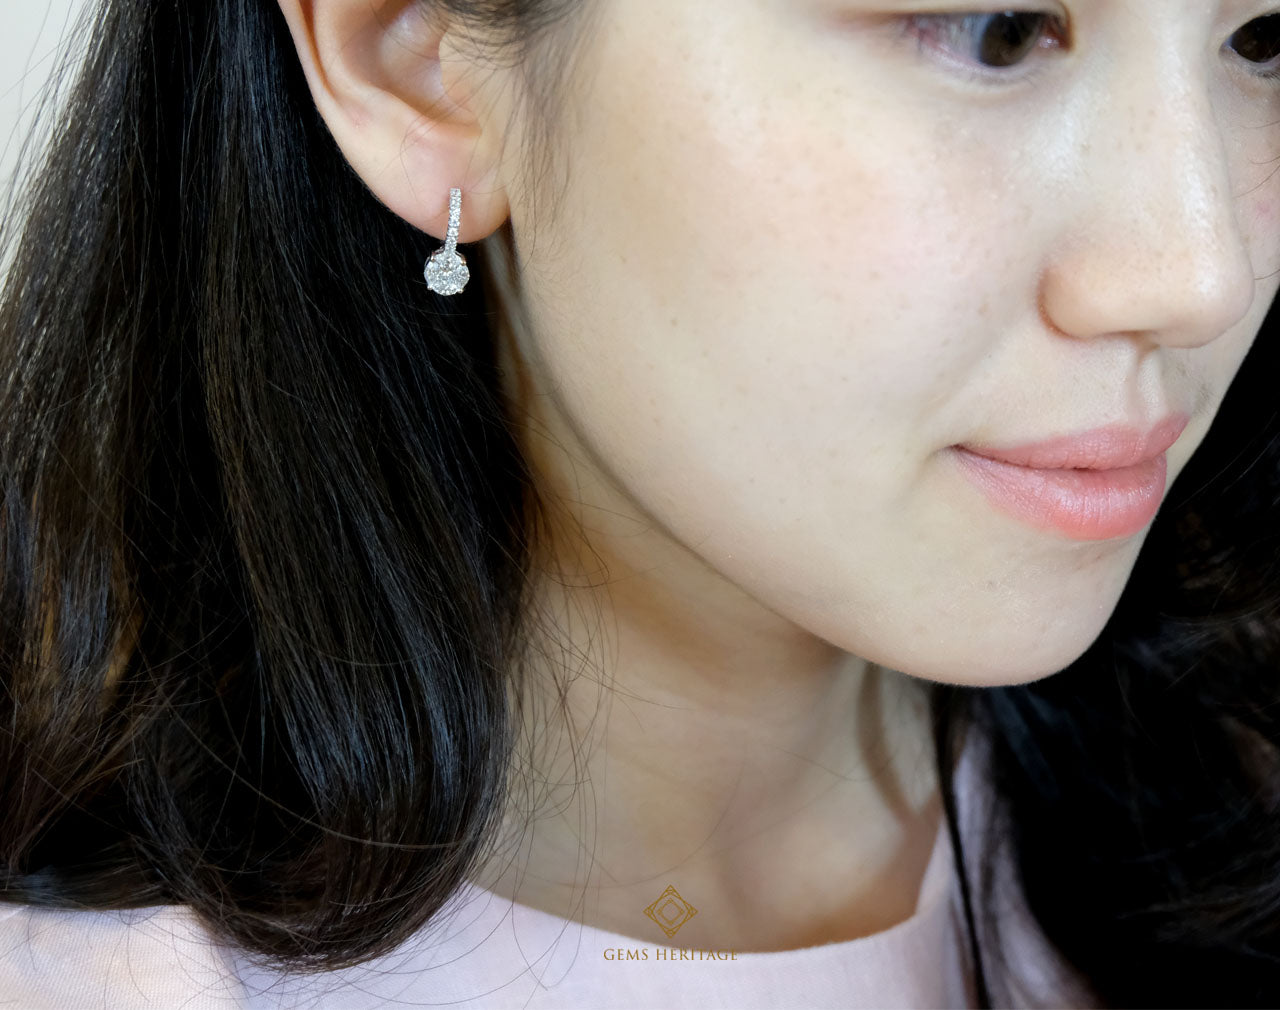 Illusion setting Diamond earrings with small hoops (erwg089)